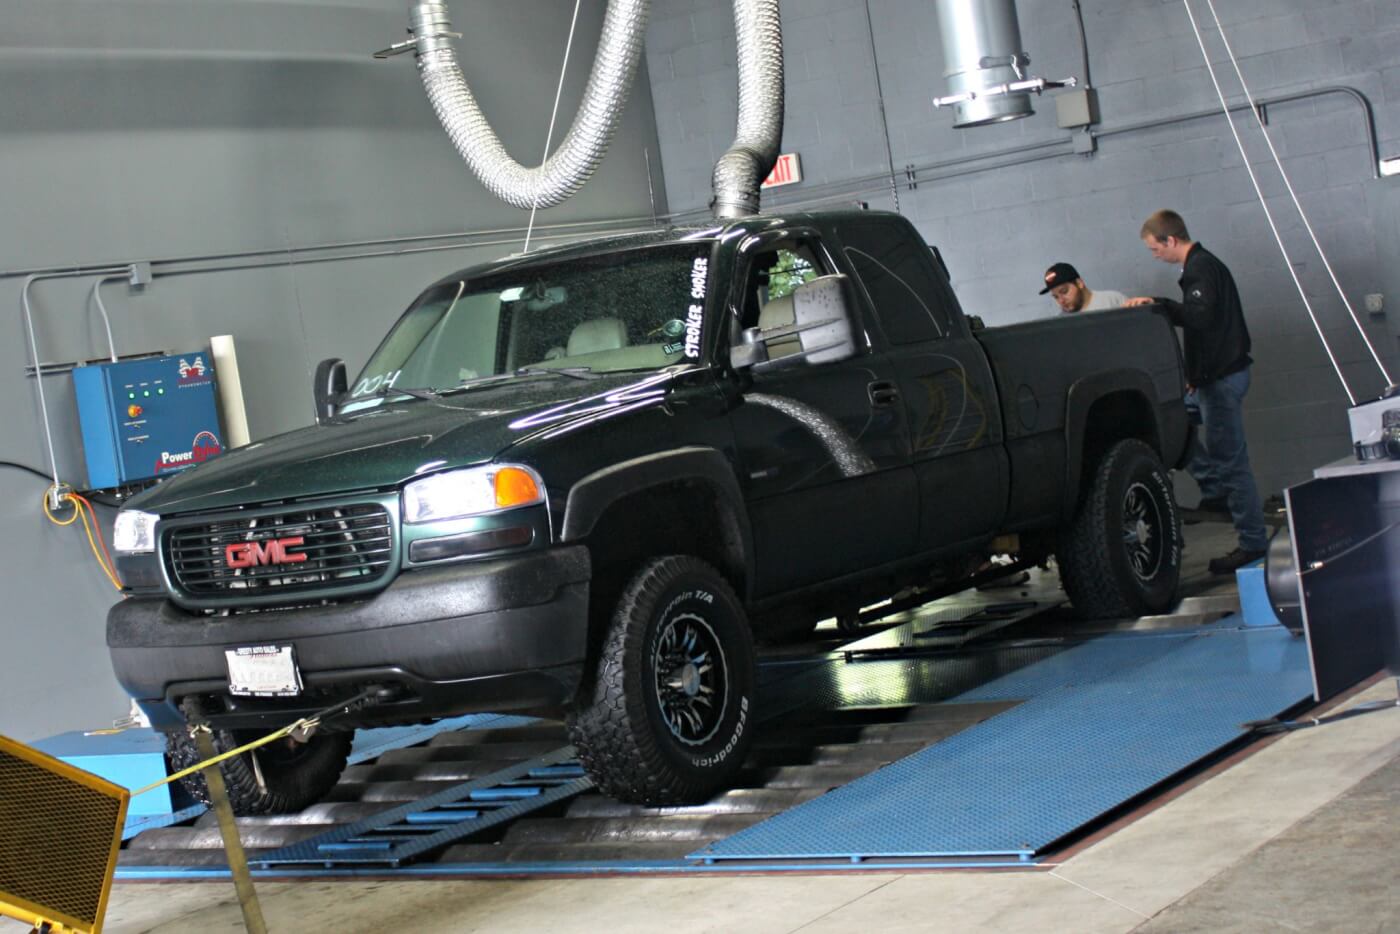 Kyle Novak of Machesney Park, IL, strapped his 2001 GMC Sierra down to the dyno to see where his hard work and bundle of aftermarket parts helped him get to; with 623hp to the ground, it’s safe to say where ever he’s headed to next, he’ll get there quick.